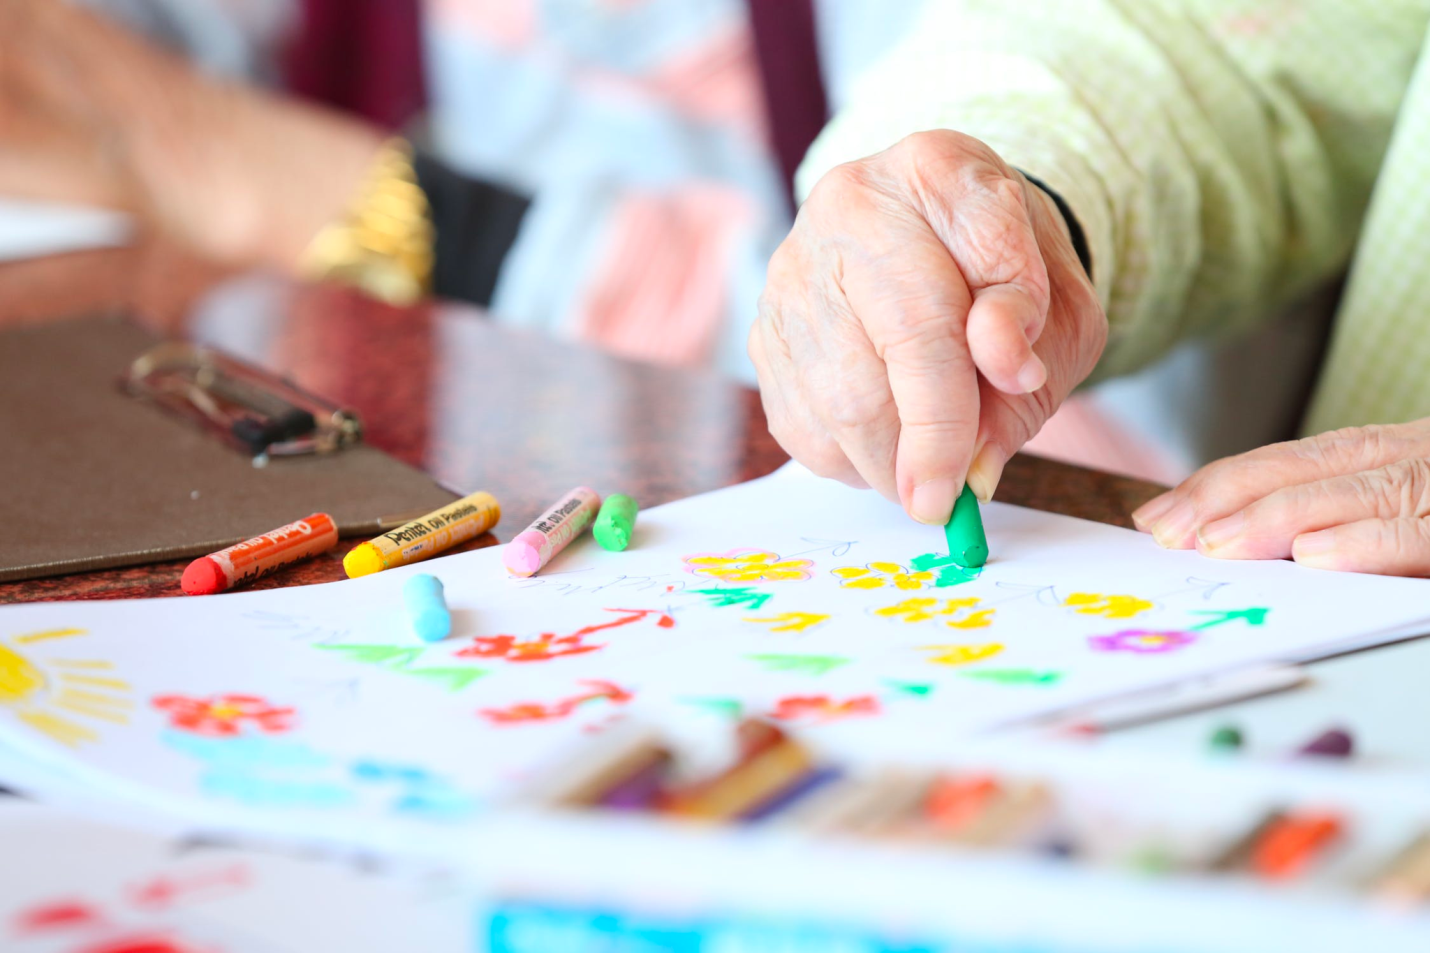 A person with an arthritic hand holds a crayon while coloring.